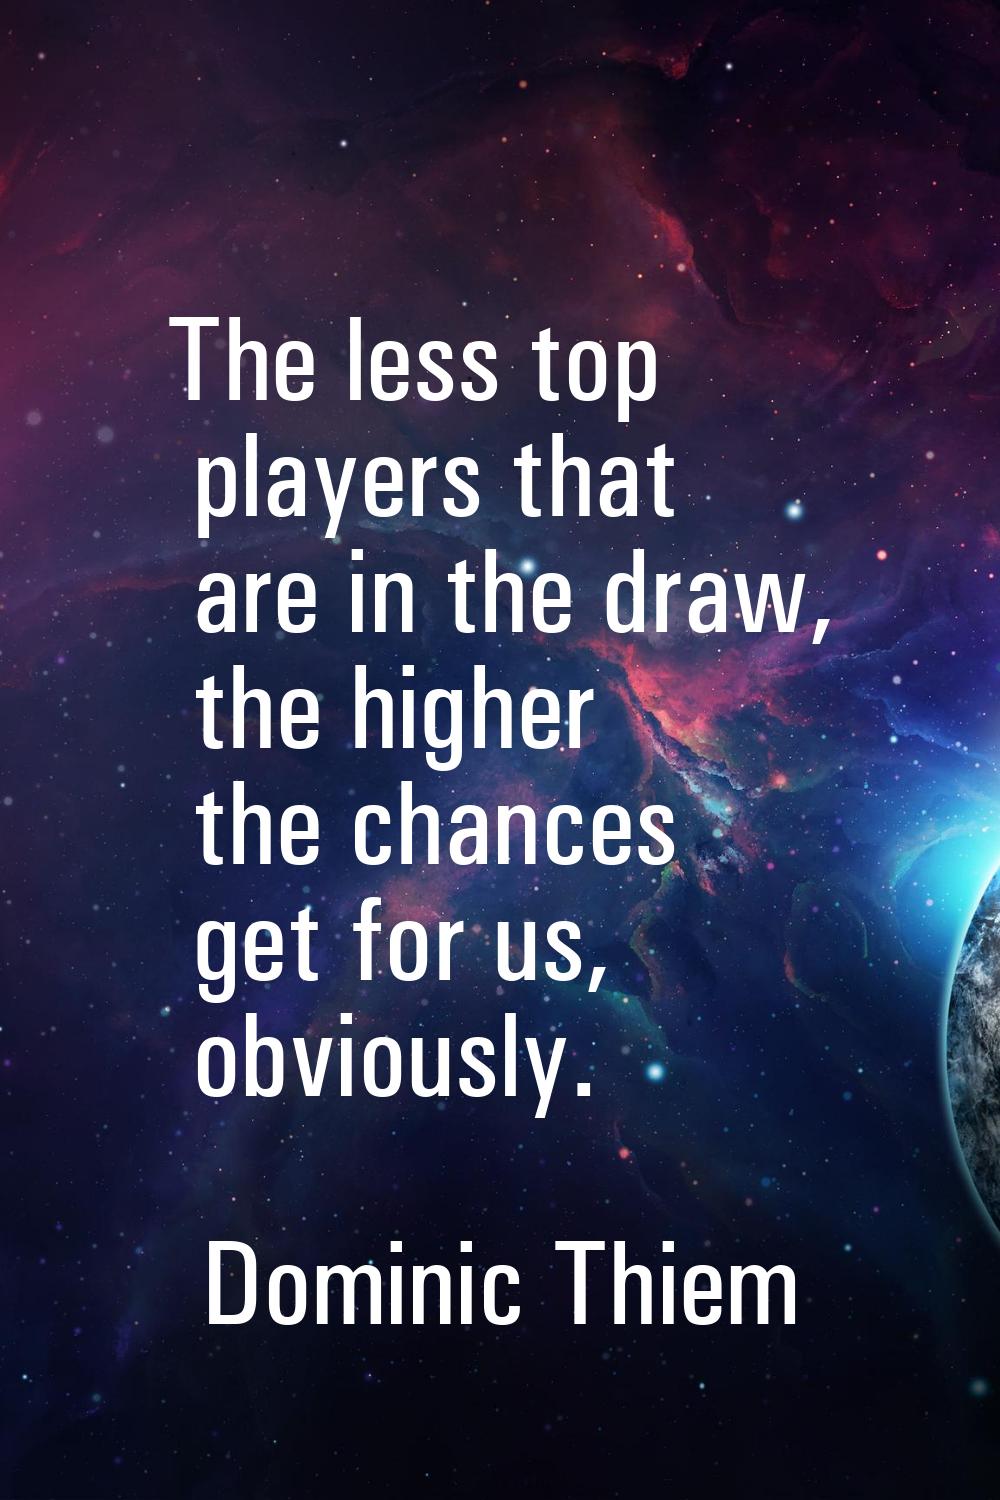 The less top players that are in the draw, the higher the chances get for us, obviously.